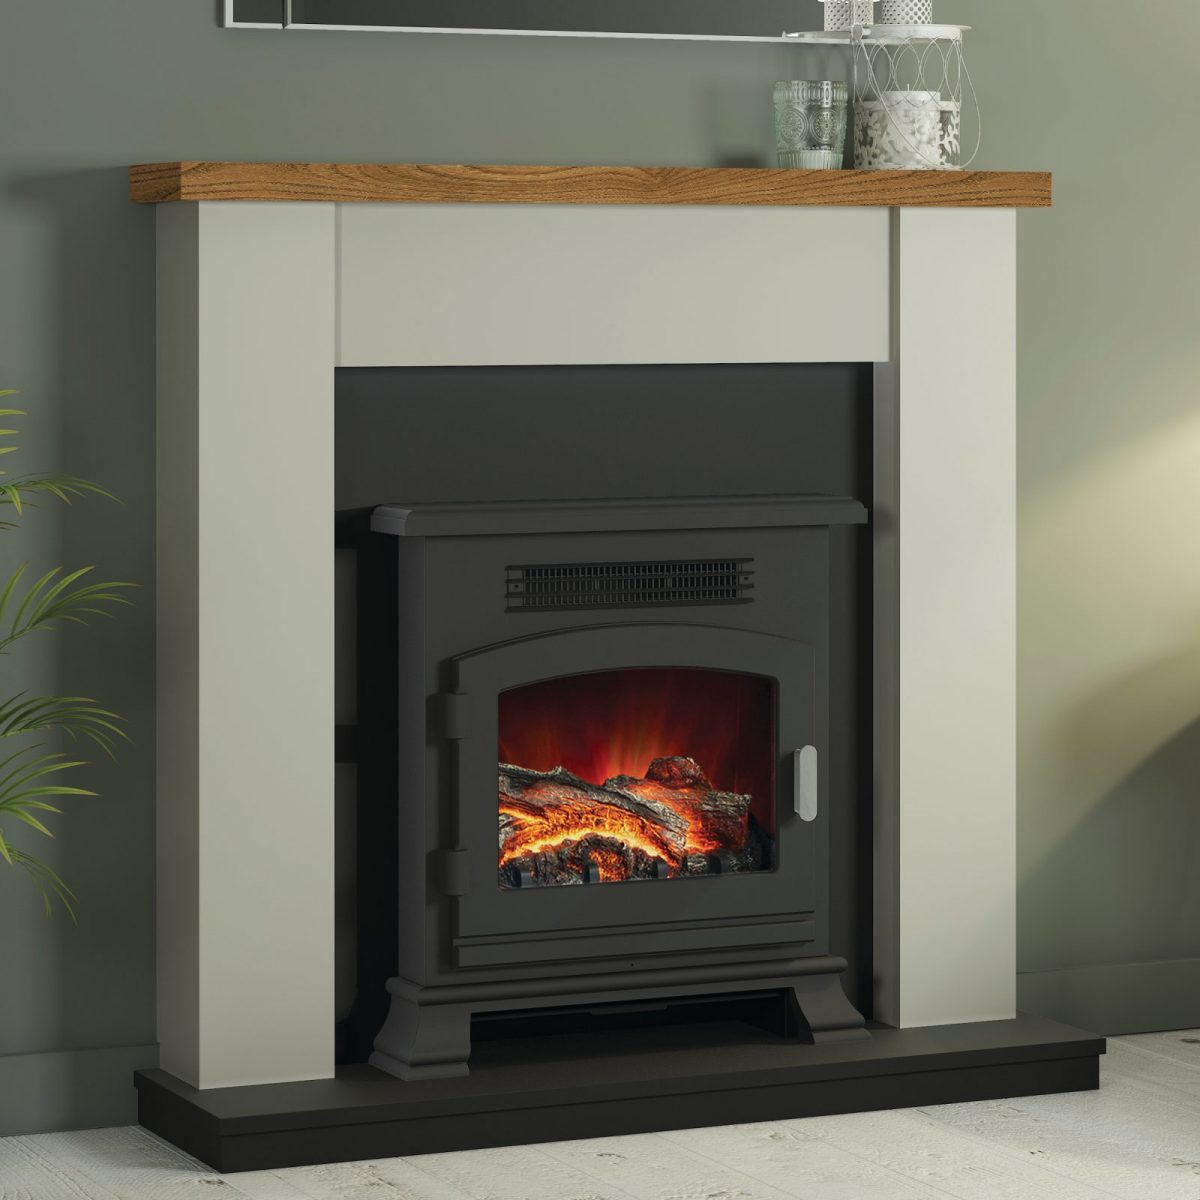 42″ Ravensdale fireplace in Anthracite finish with a Country Oak top and an Anthracite Electric Stove